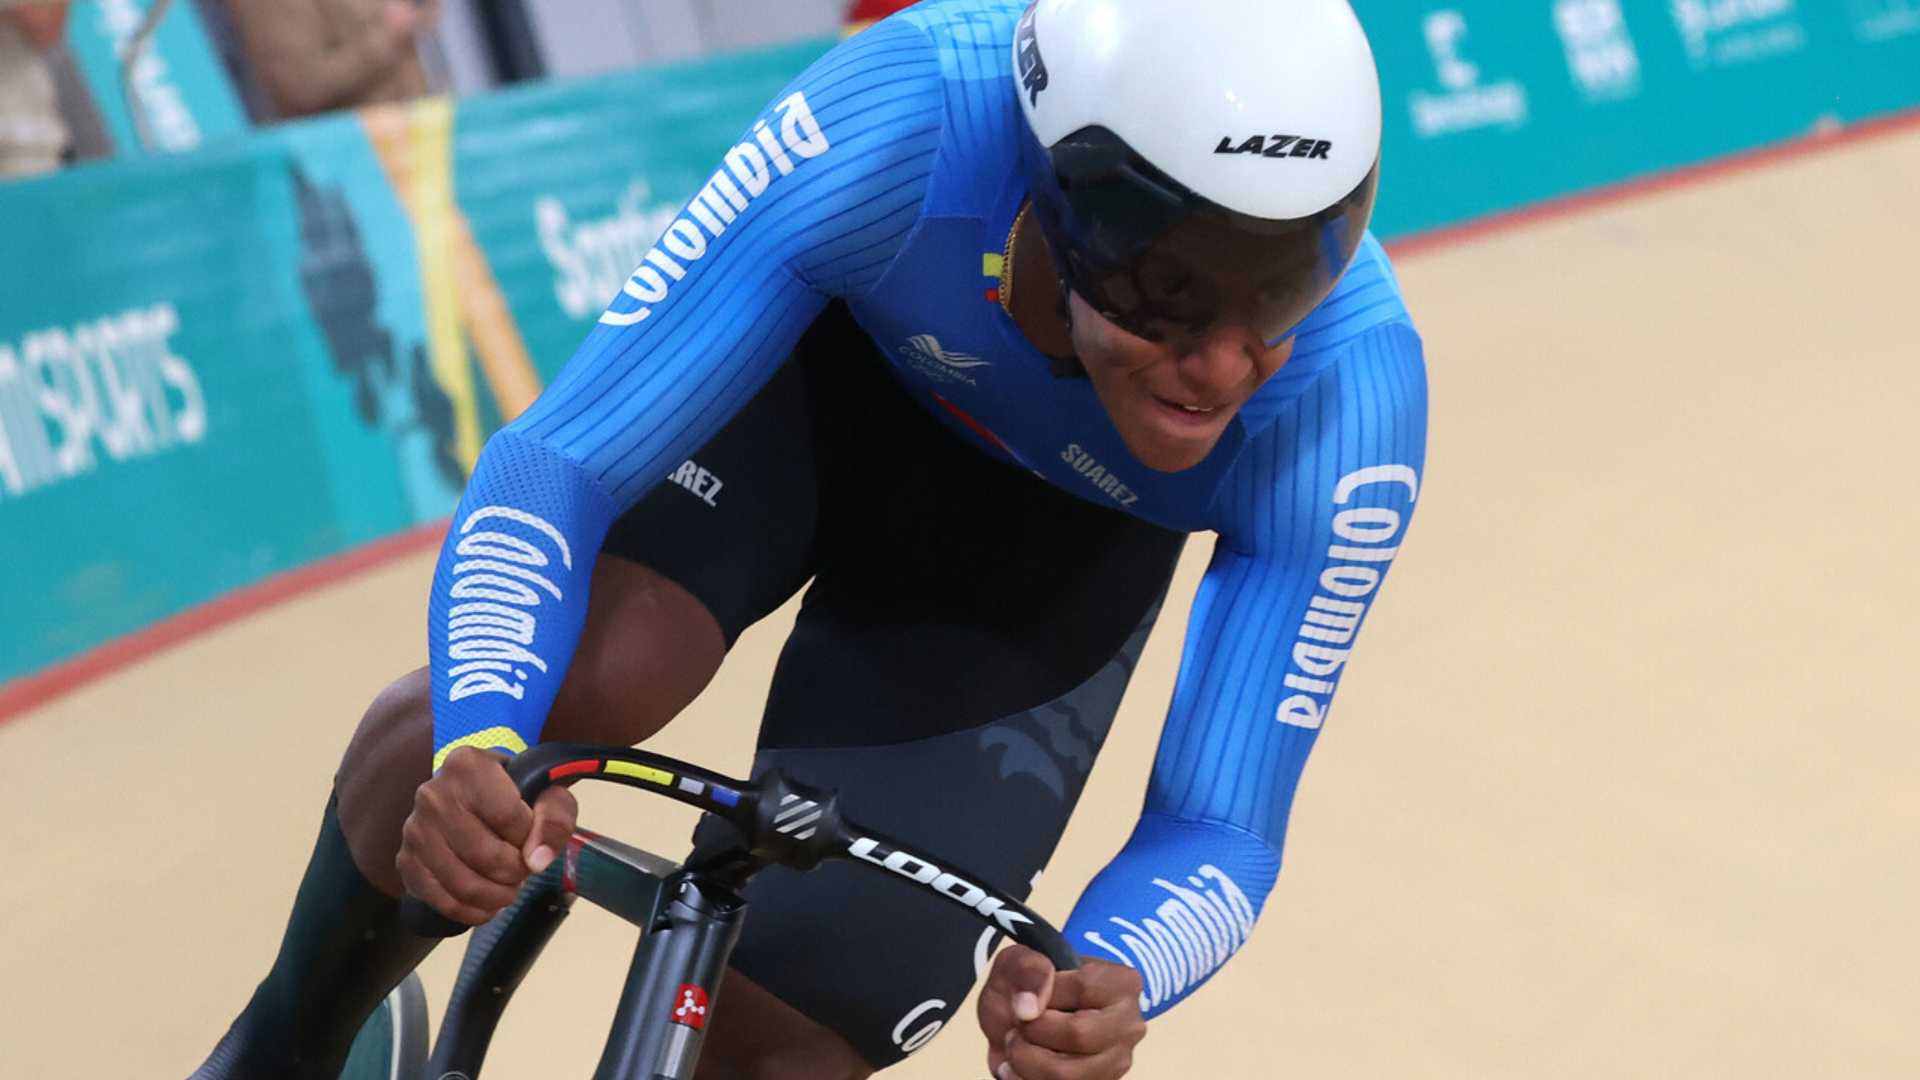 World Champion Kevin Quintero shines with a gold in the Keirin